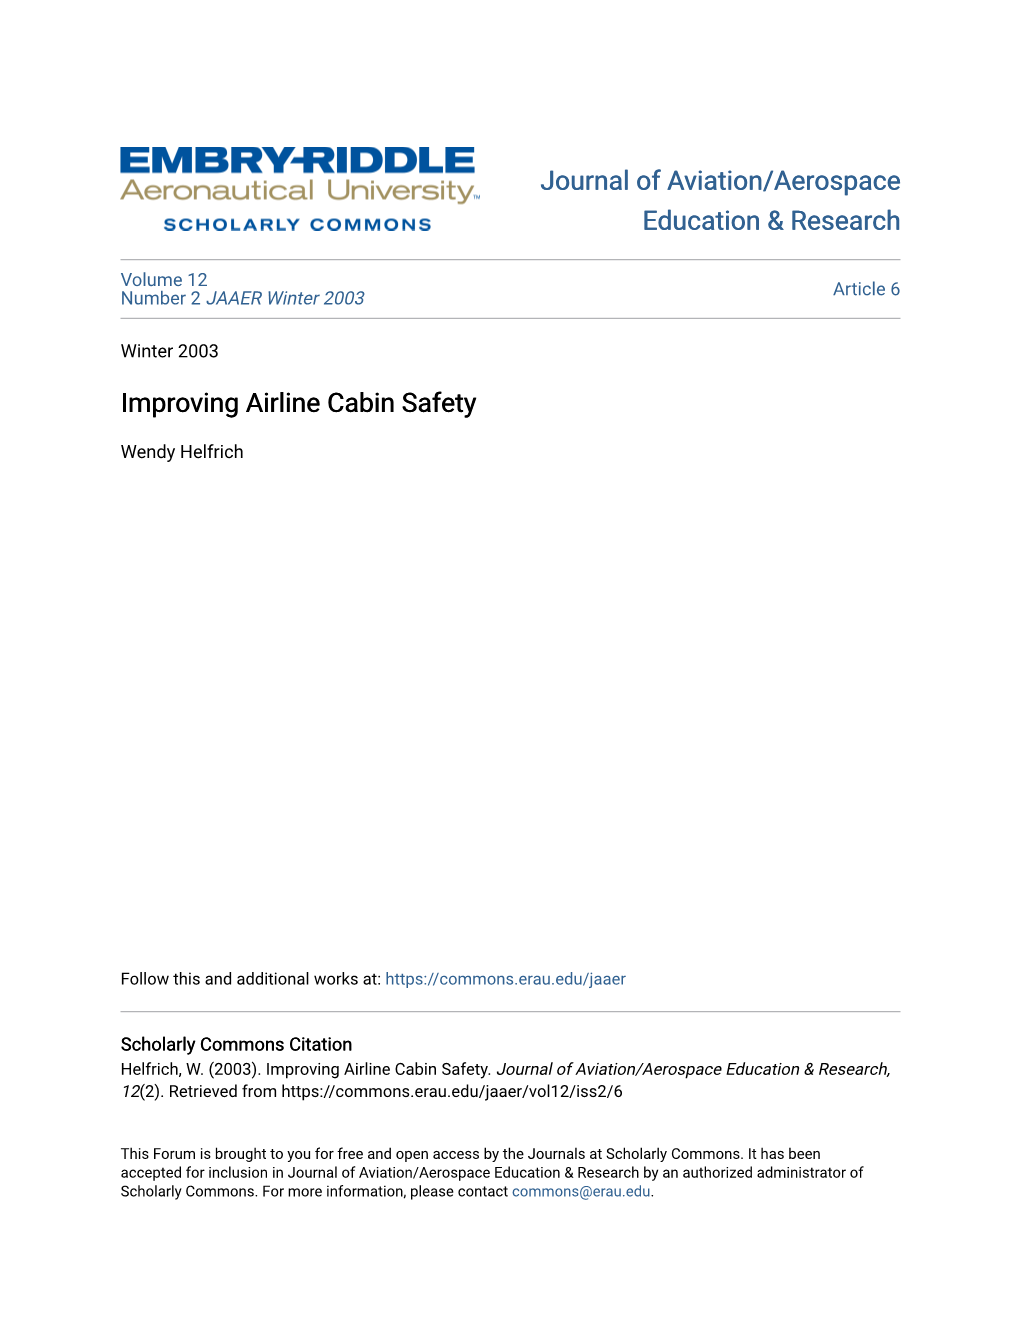 Improving Airline Cabin Safety